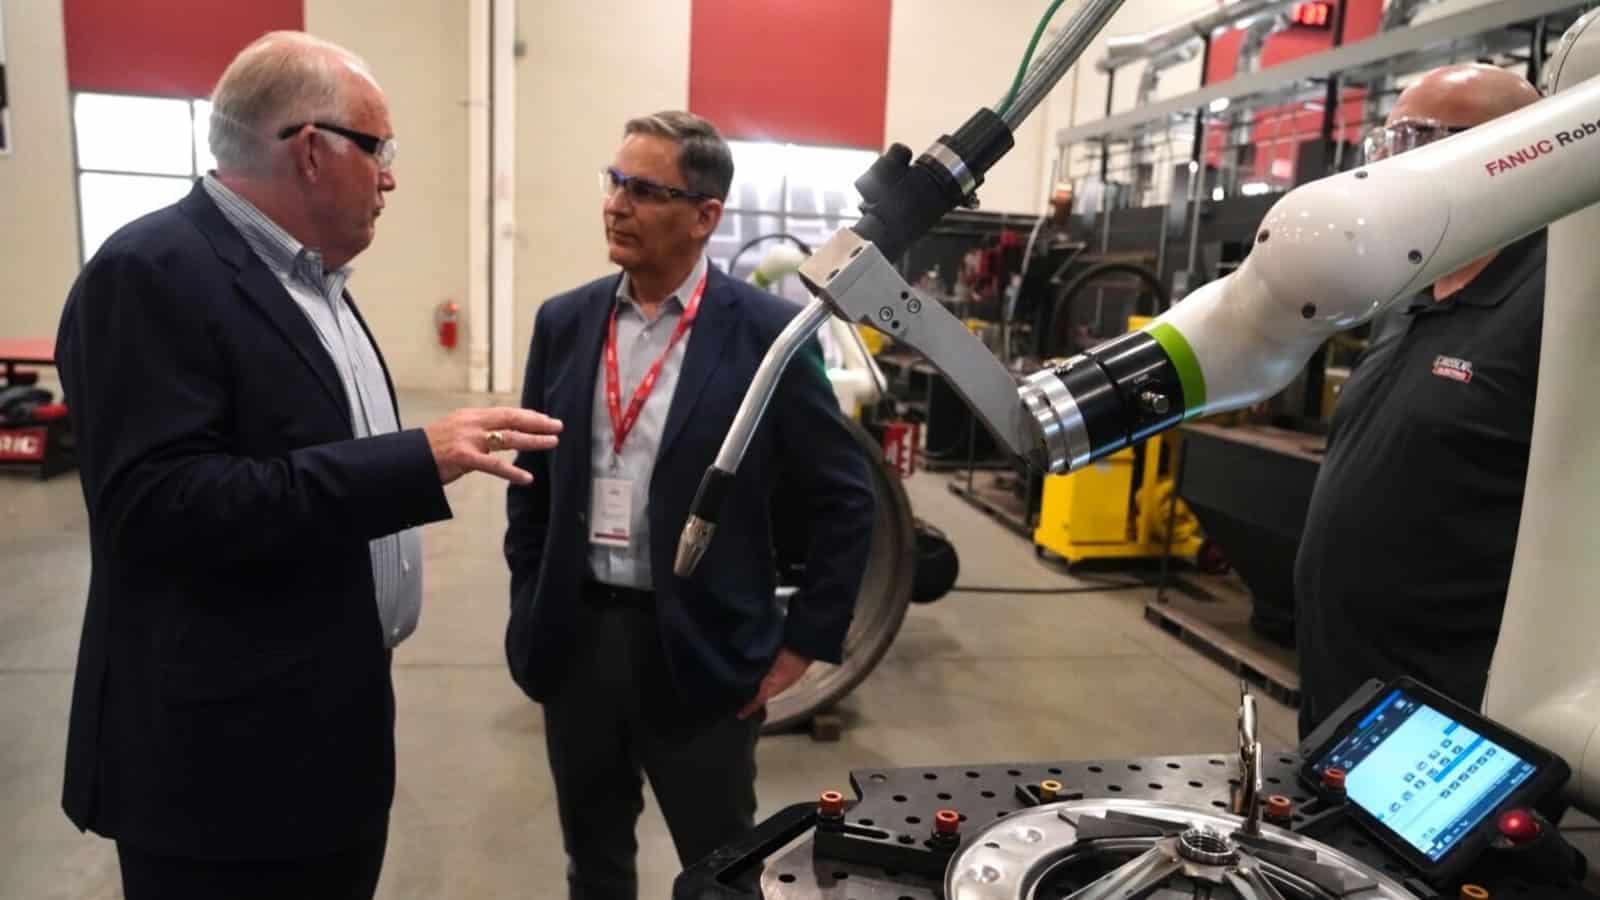 Lincoln Electric adds to its manufacturing skills